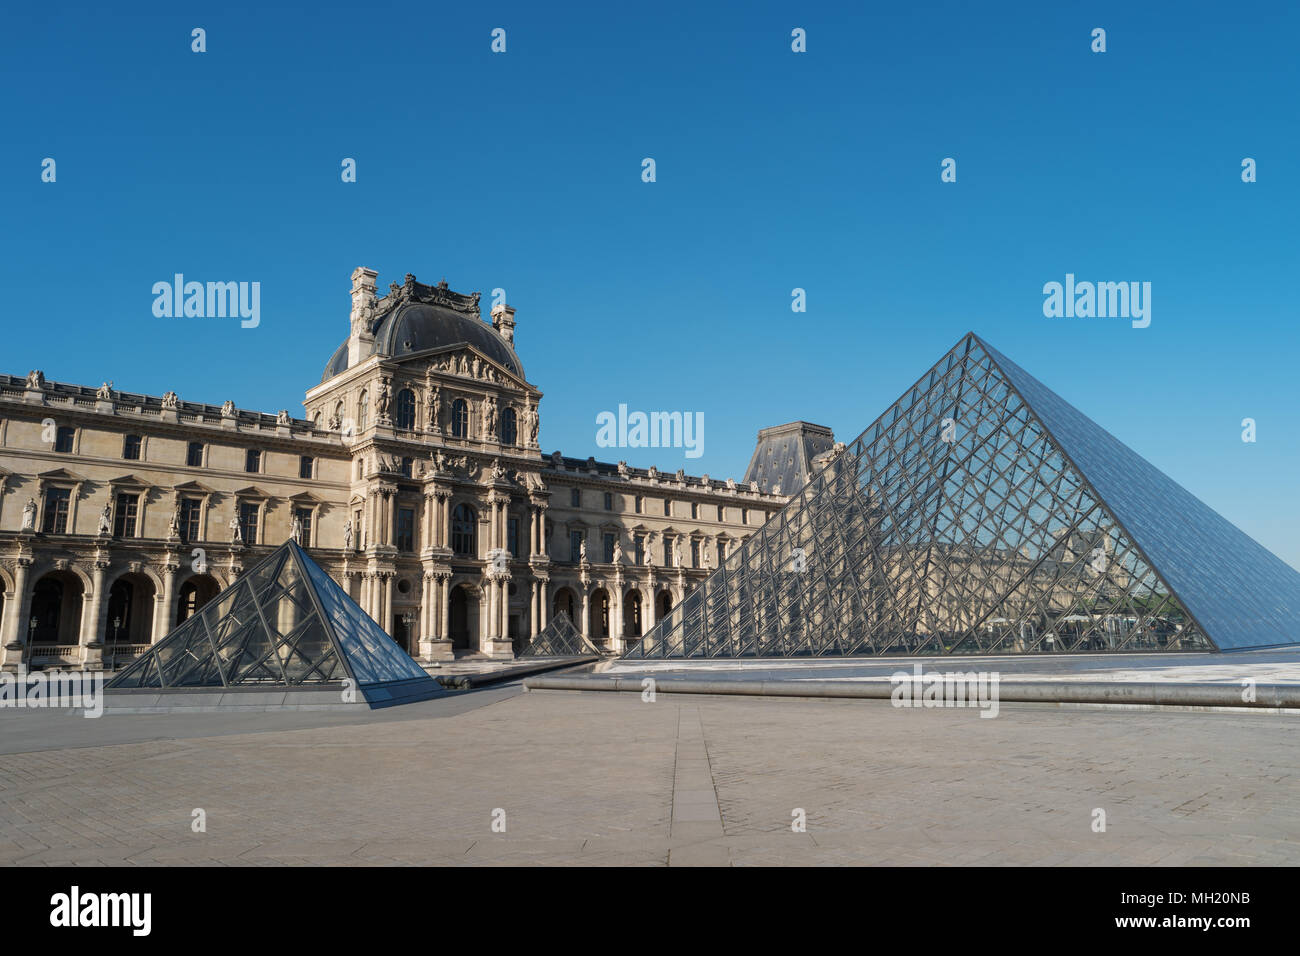 Paris, France, April 27, 2017: Louvre Museum, building and pyramid, France, Europe. Louvre Museum is one of largest and most visited museums worldwide Stock Photo